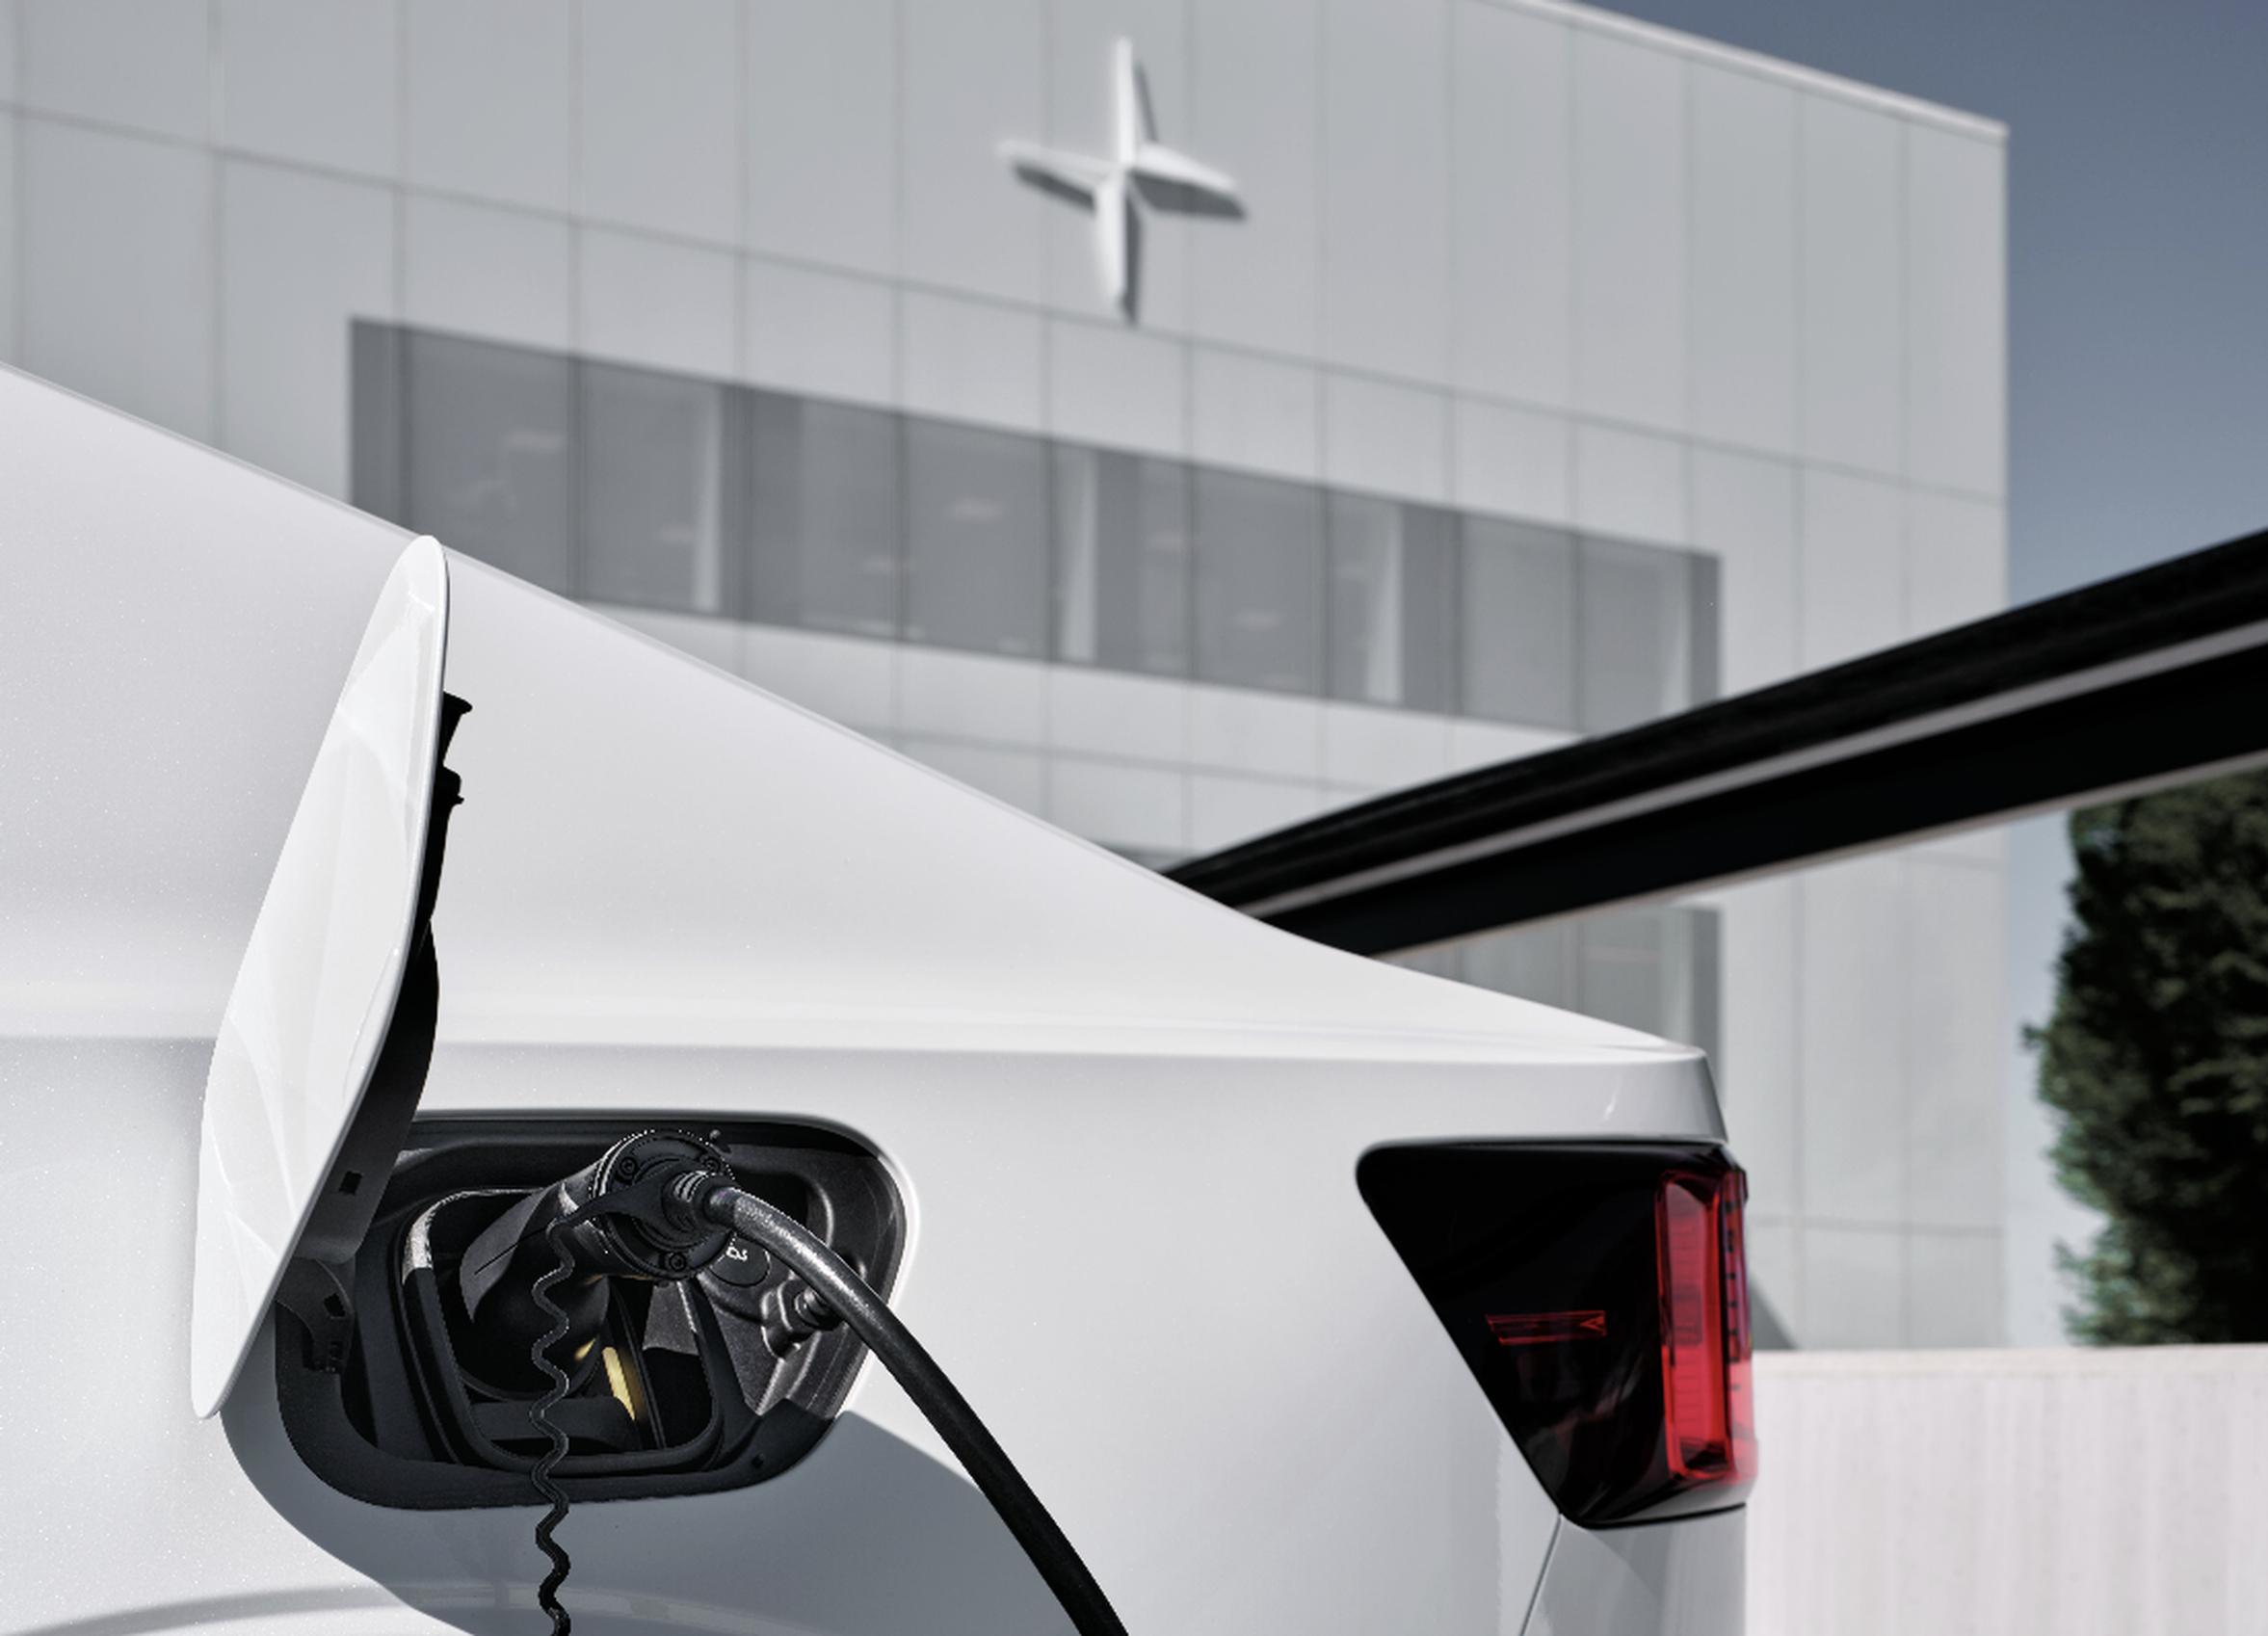 Polestar Charge offers access to over 650,000 charging points in Europe